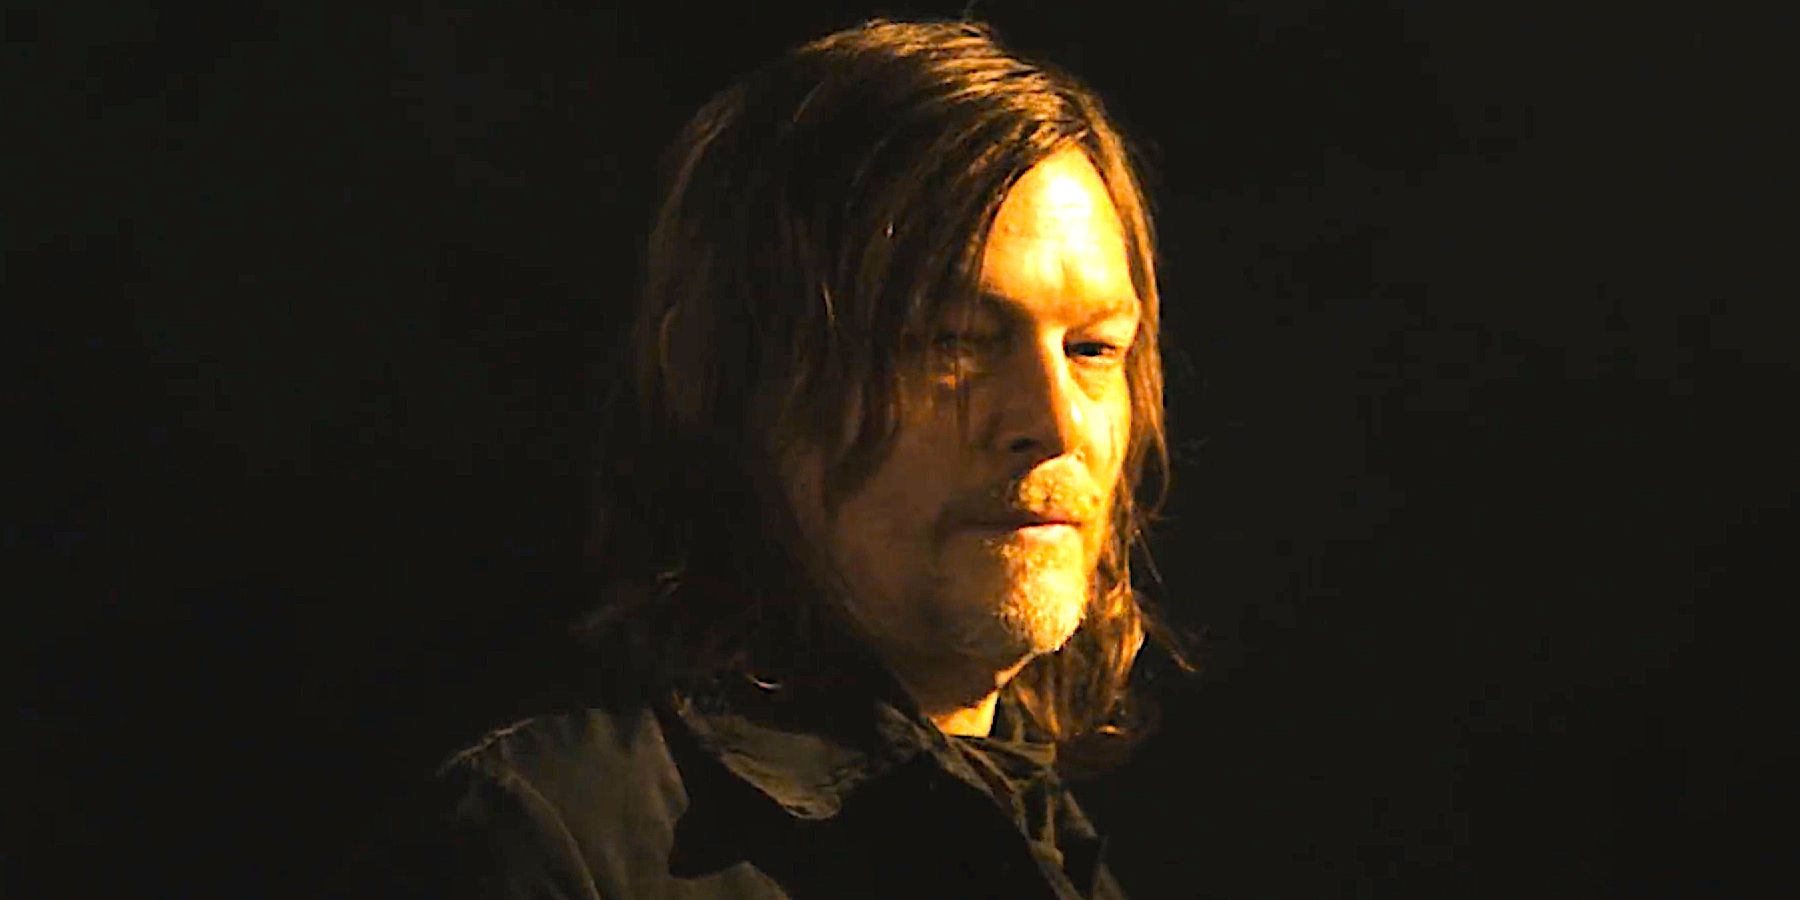 “We’re Making Art”: Norman Reedus Teases Daryl Dixon Spinoff’s Differences From Walking Dead